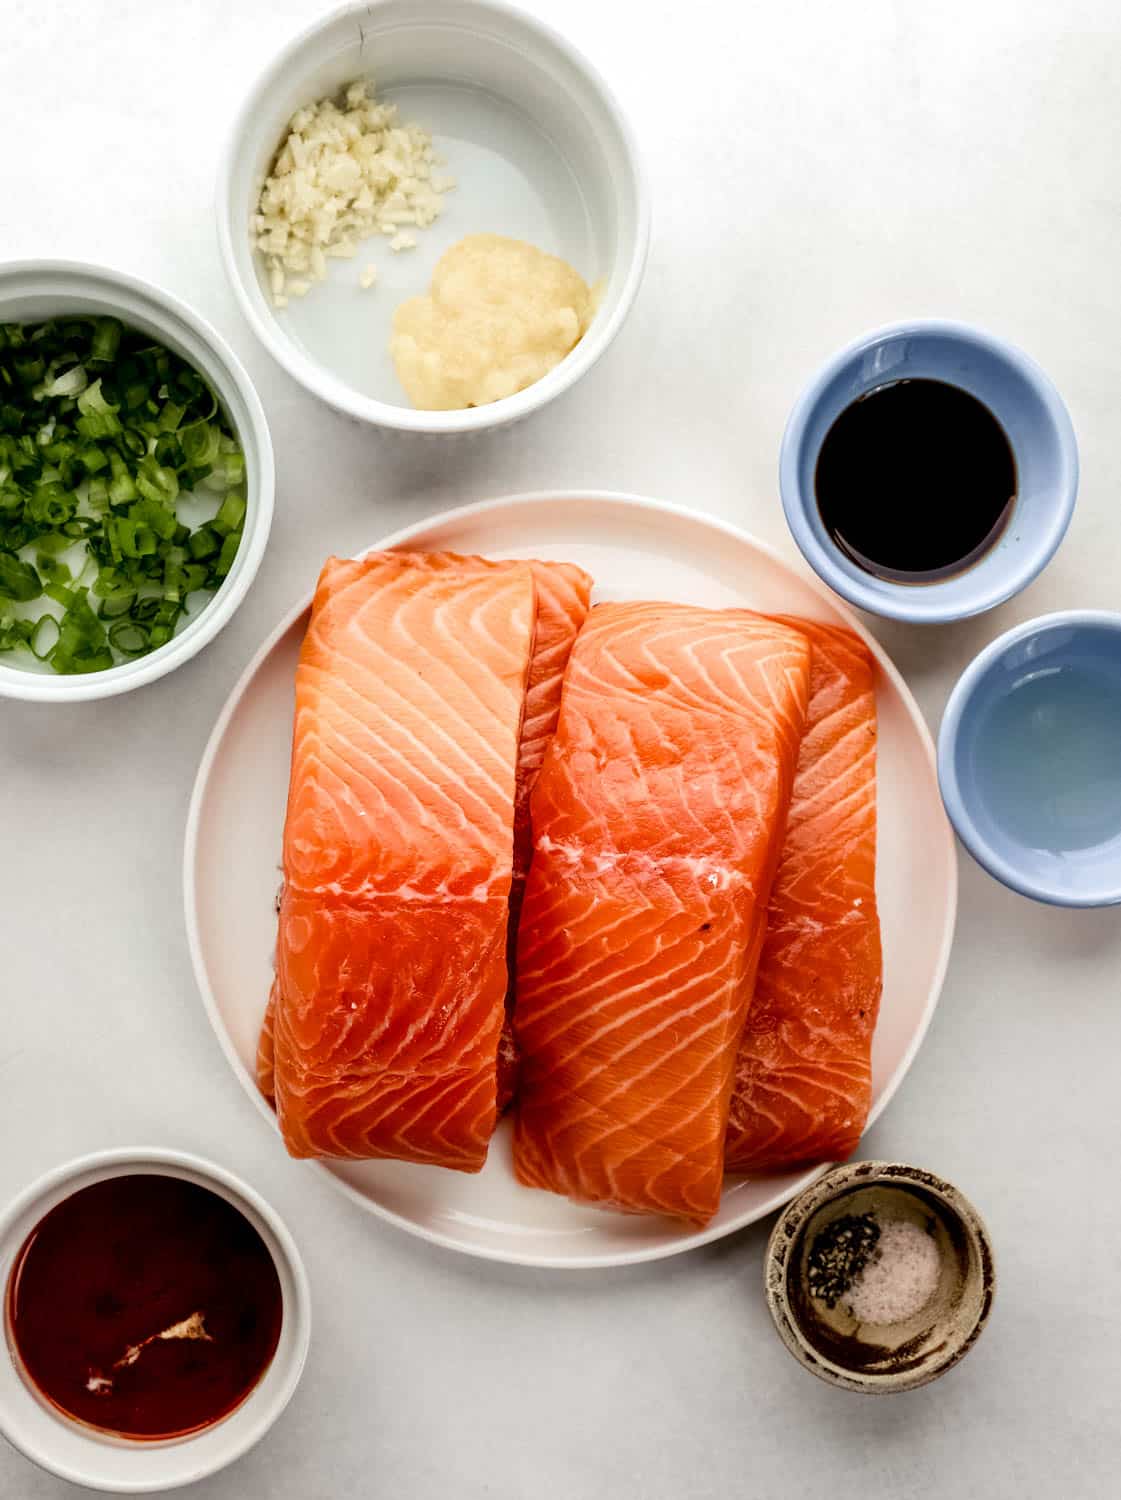 Overhead view of ingredients needed to make salmon in separate bowls on white surface. 